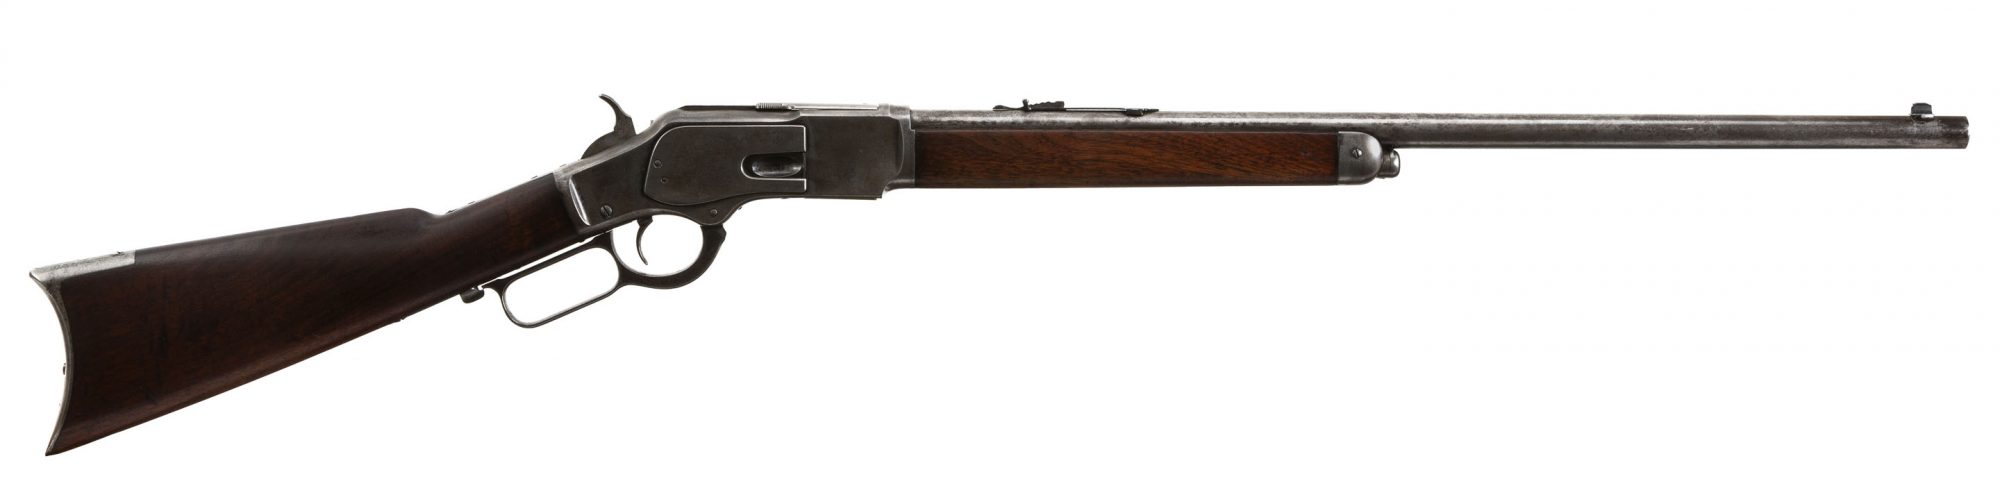 Photo of a Winchester 1873 from 1883, for sale by Turnbull Restoration of Bloomfield, NY